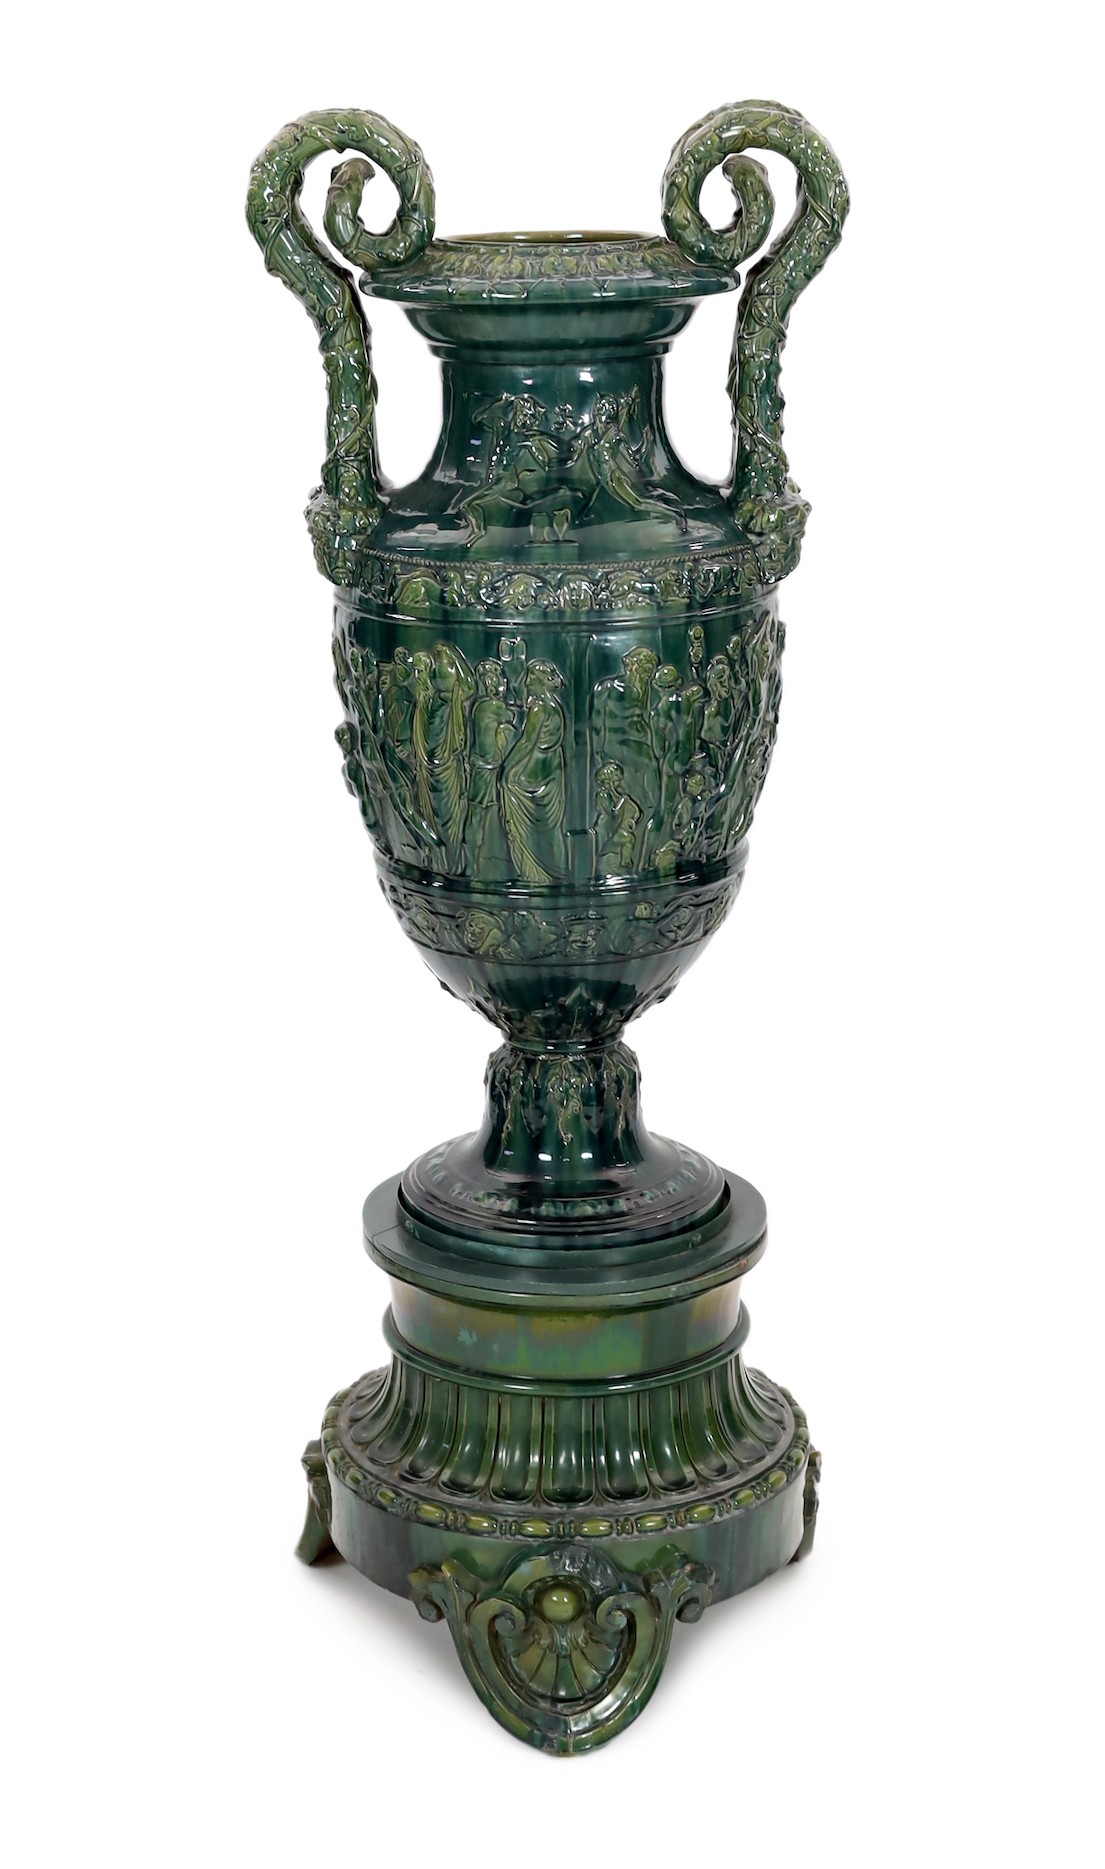 A massive Continental majolica green glazed campana vase and associated stand, late 19th century,